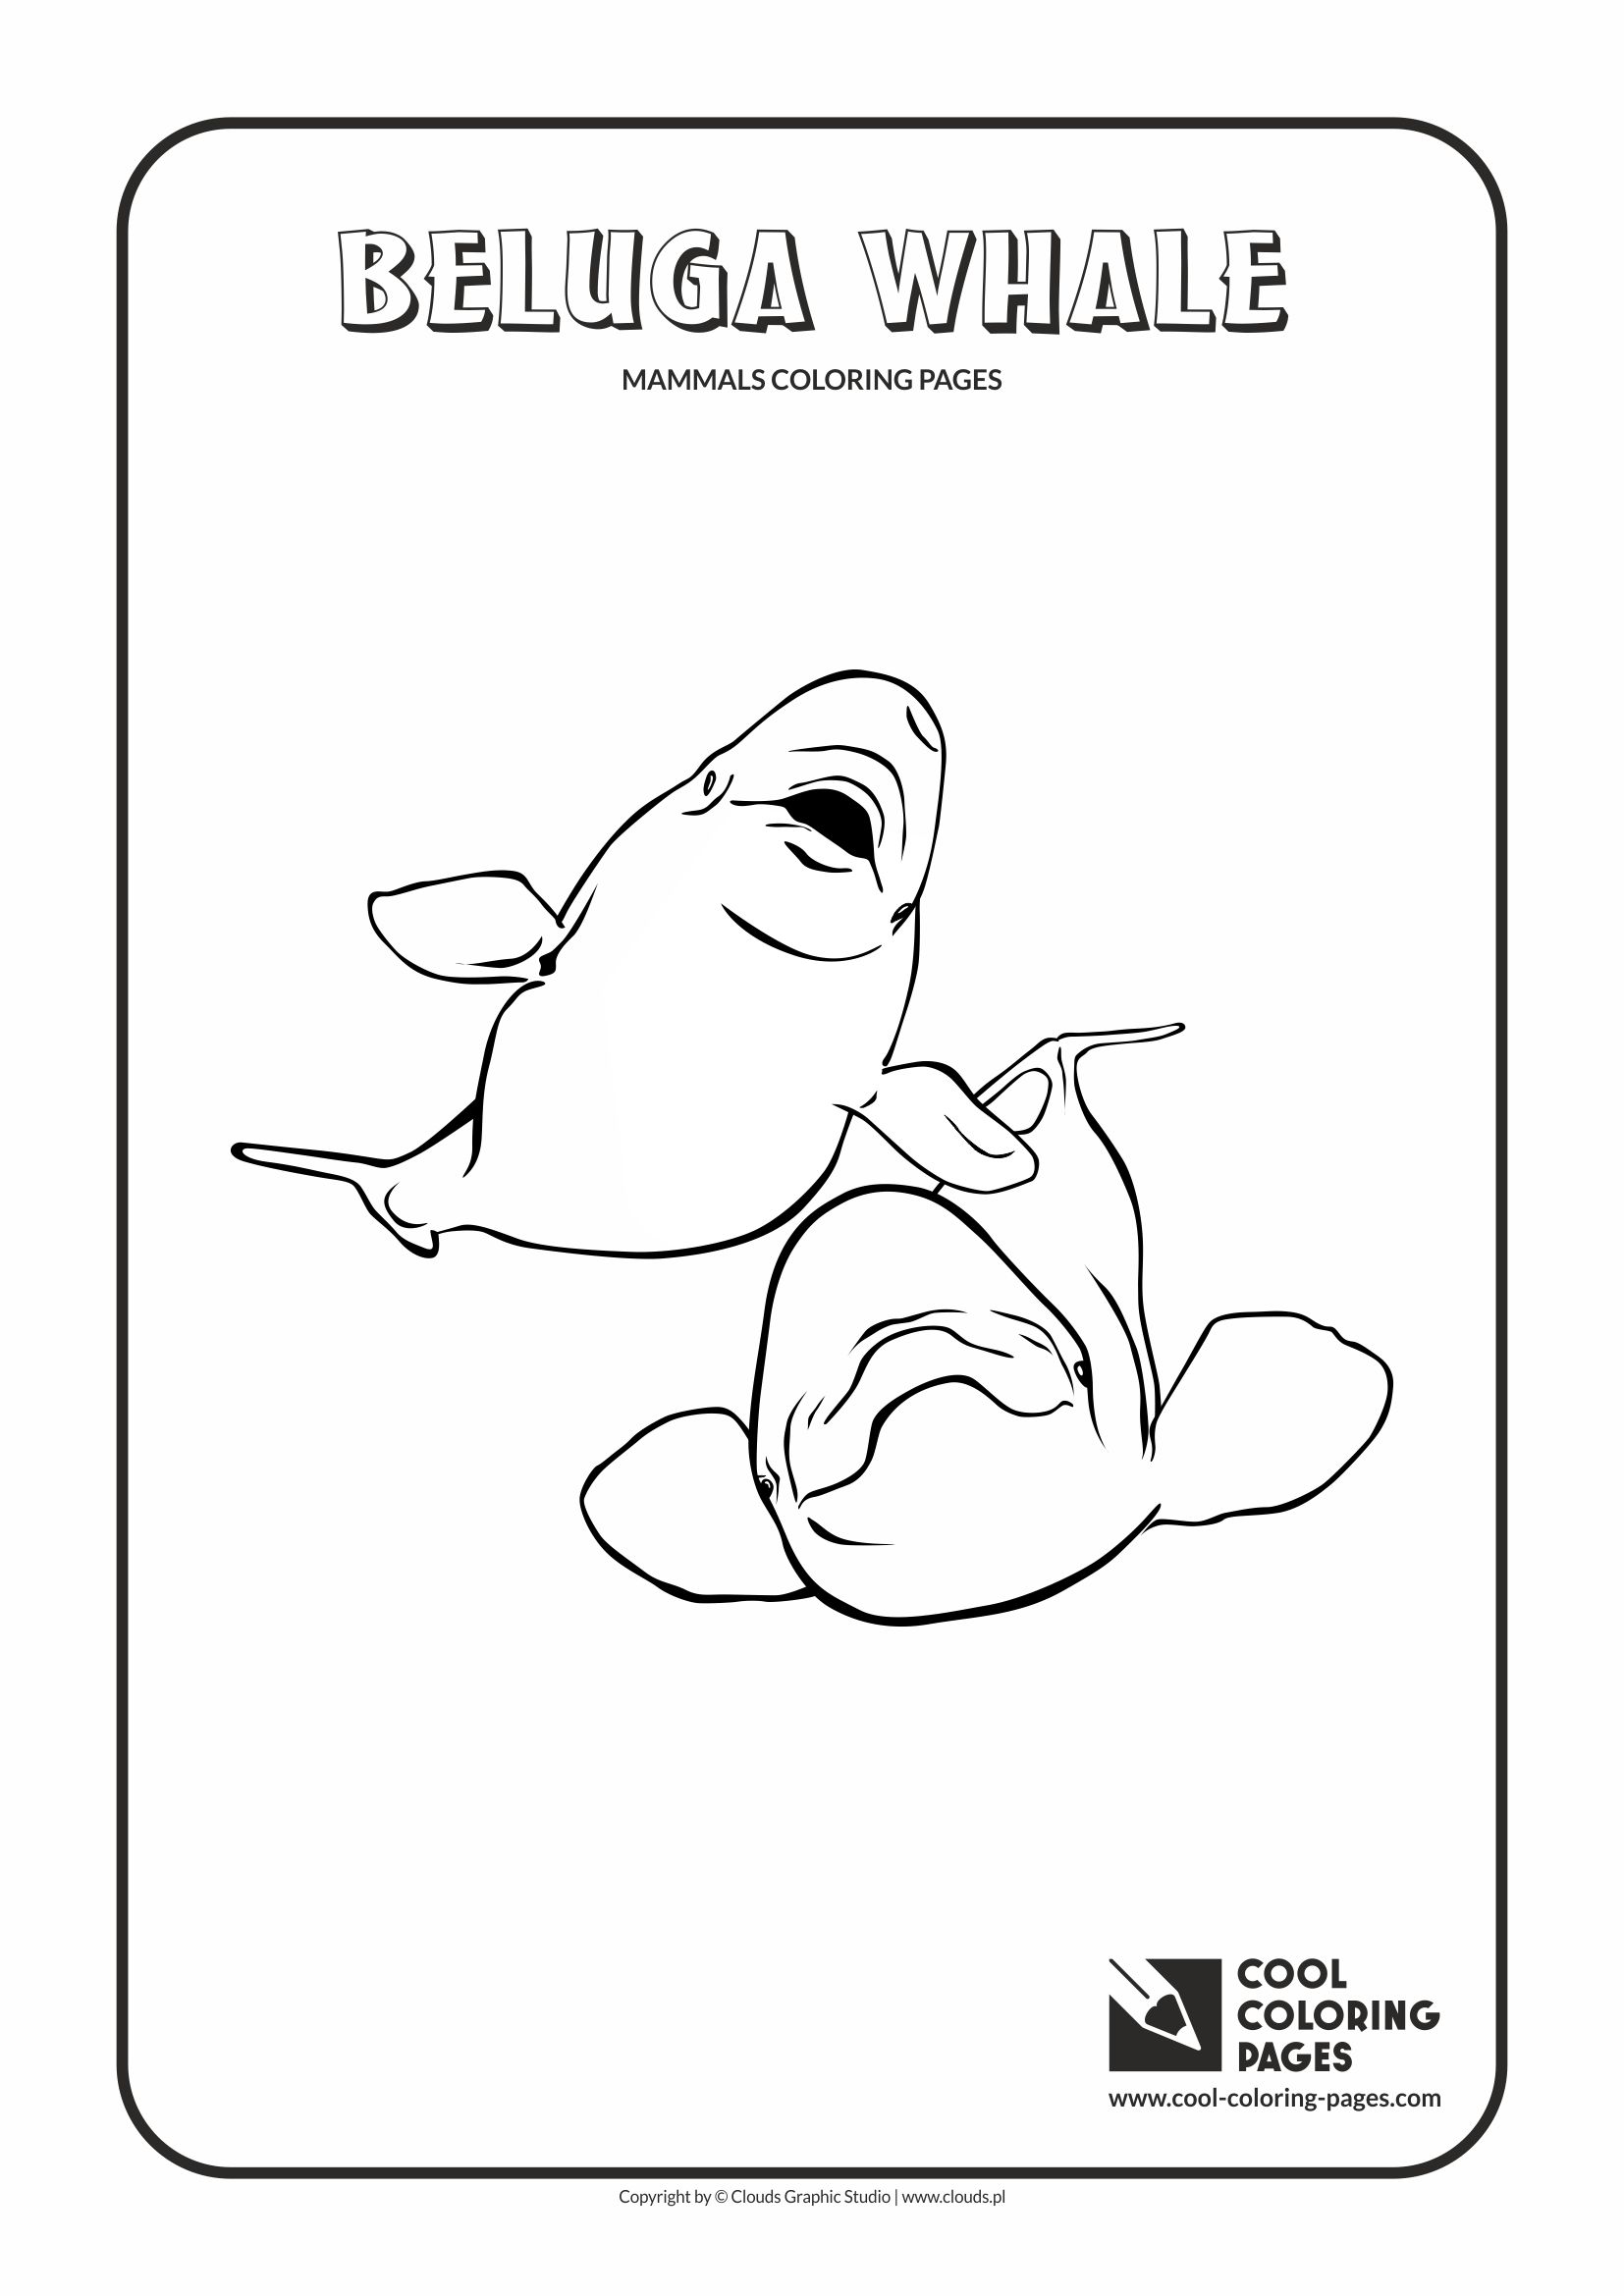 Cool Coloring Pages - Animals / Beluga whale / Coloring page with beluga whale